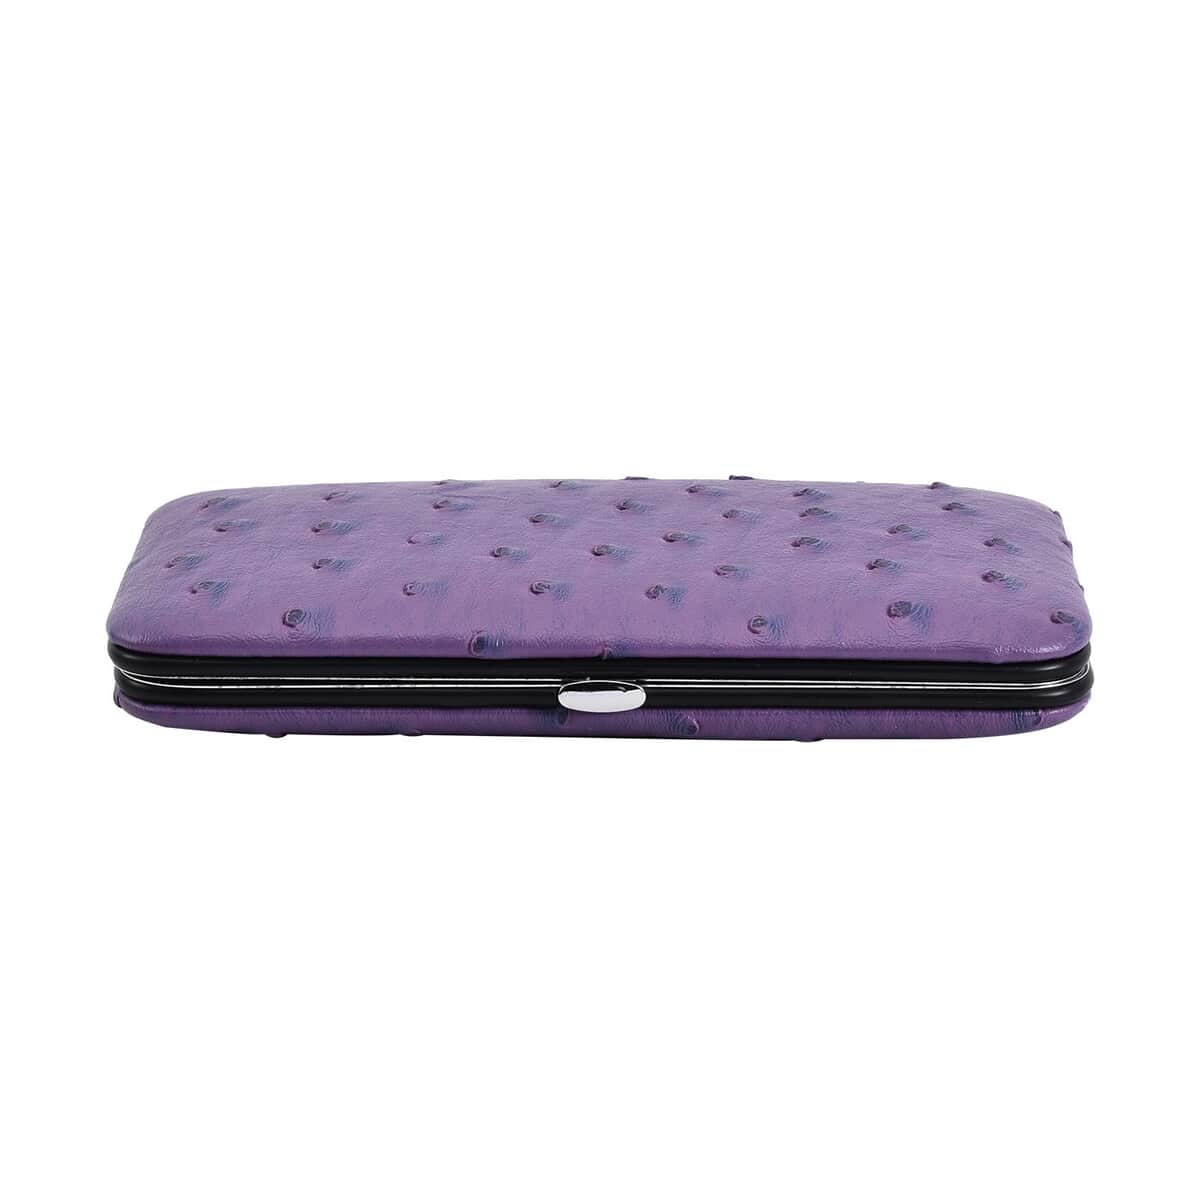 14 Piece Stainless Steel Manicure Grooming Kit in Dark Purple Ostrich Print Faux Leather Case image number 1